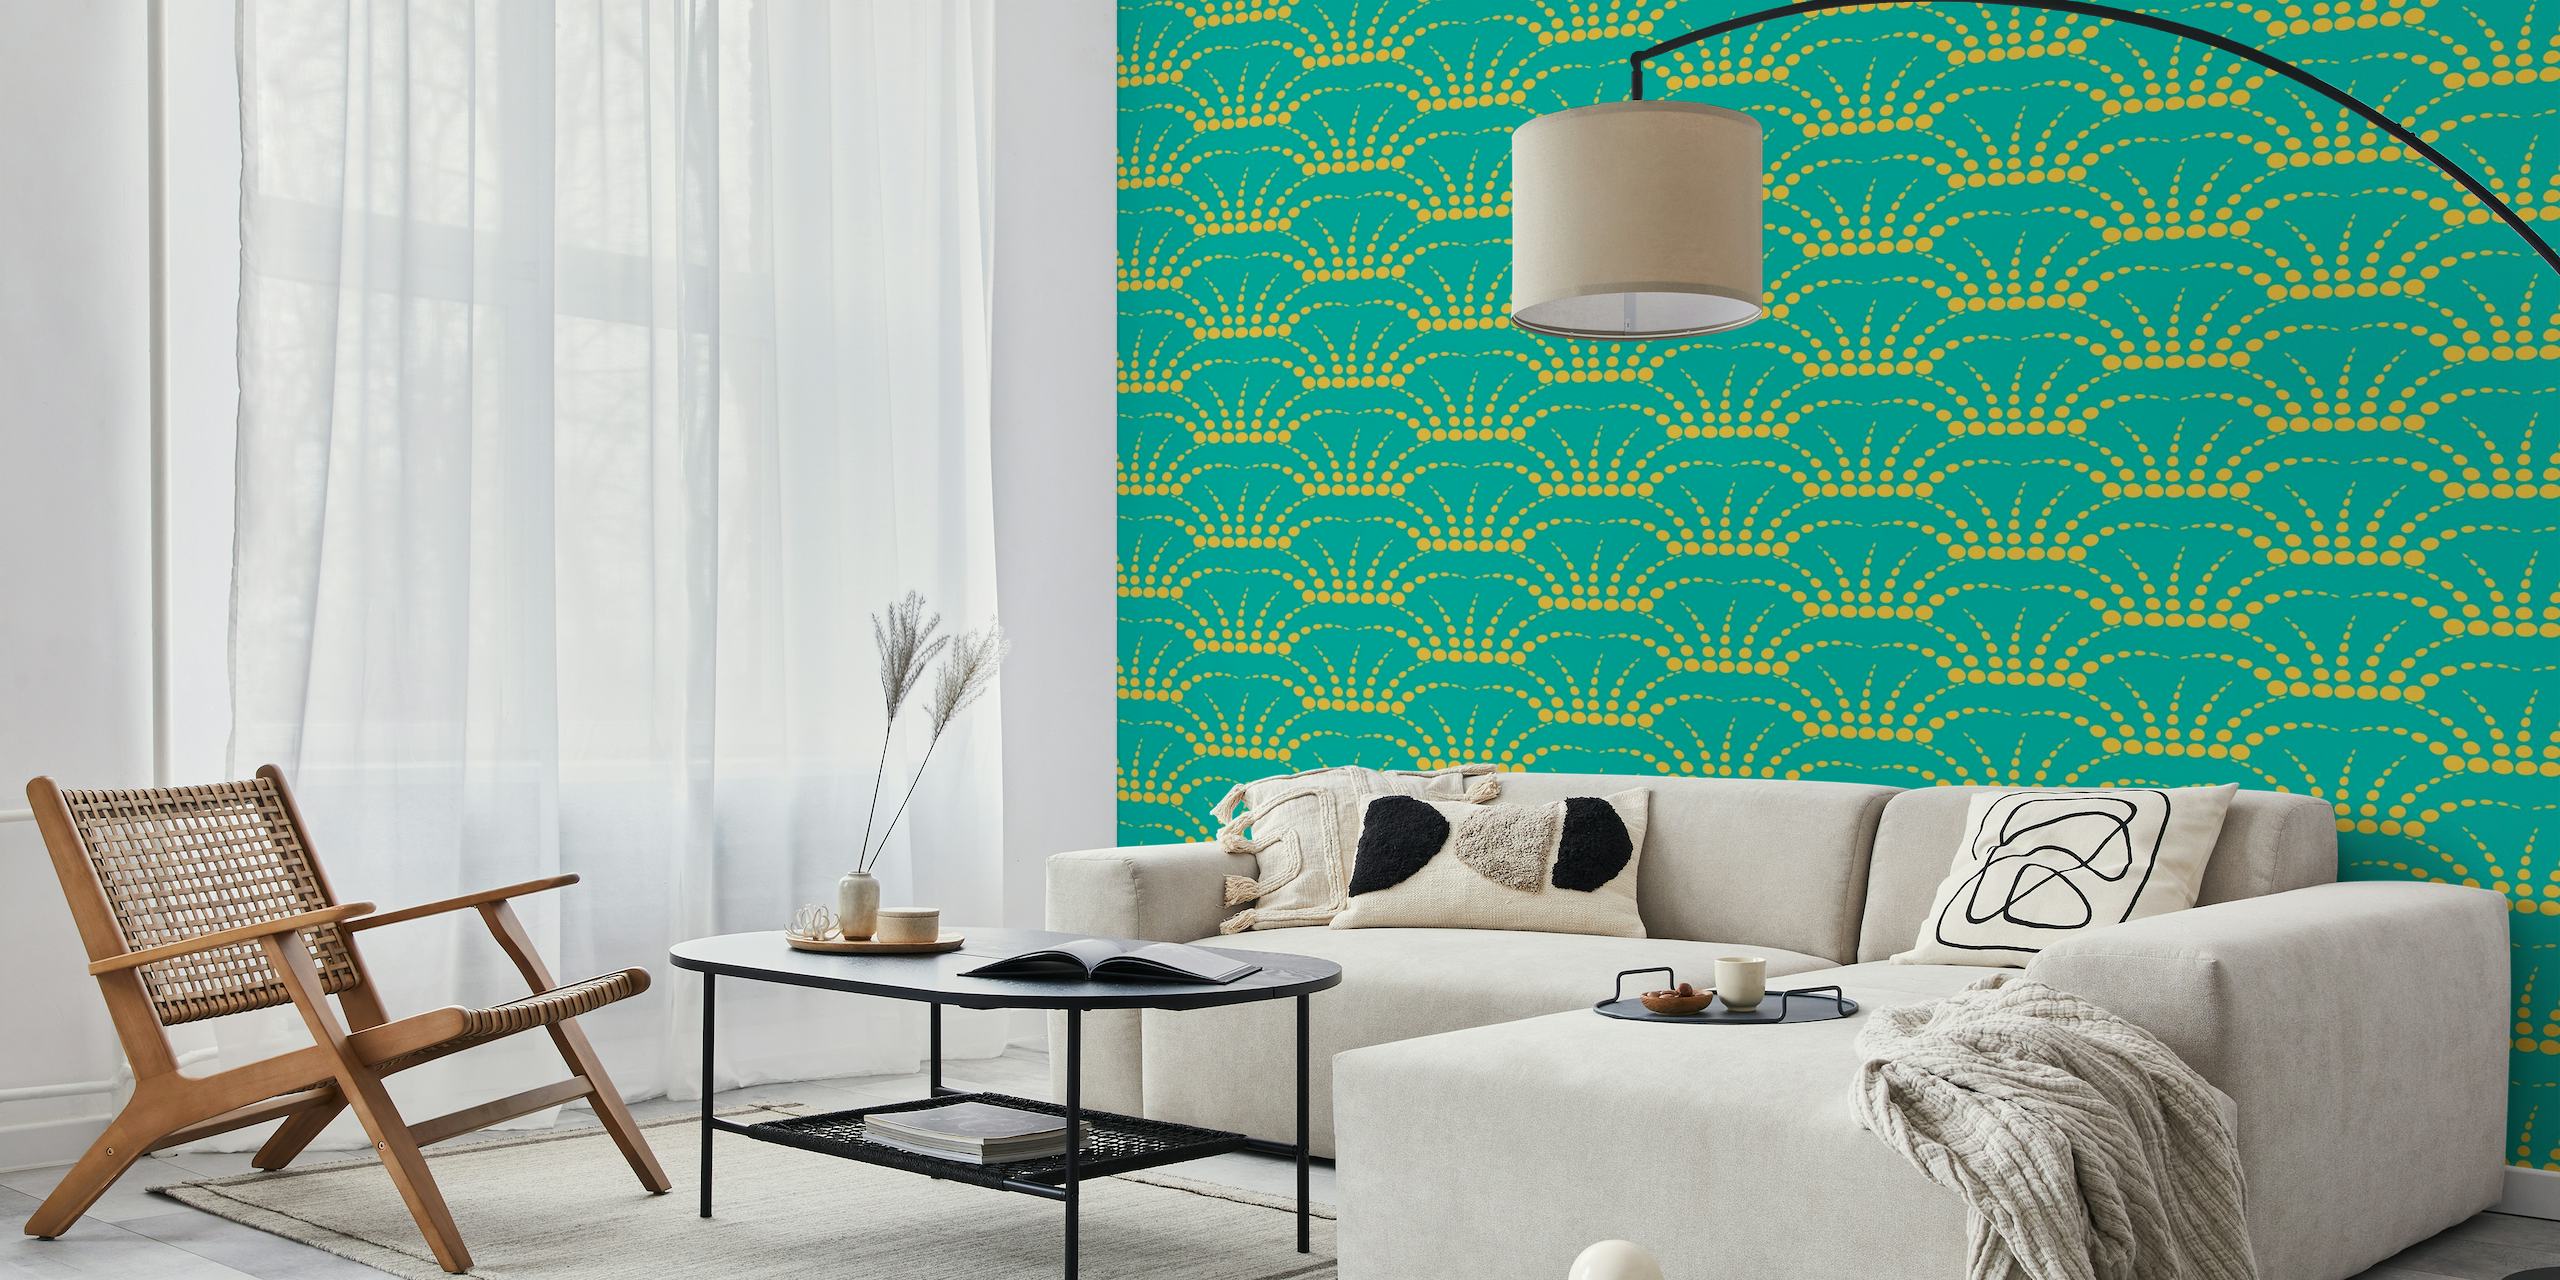 Turquoise retro abstract mural with fountain dot pattern